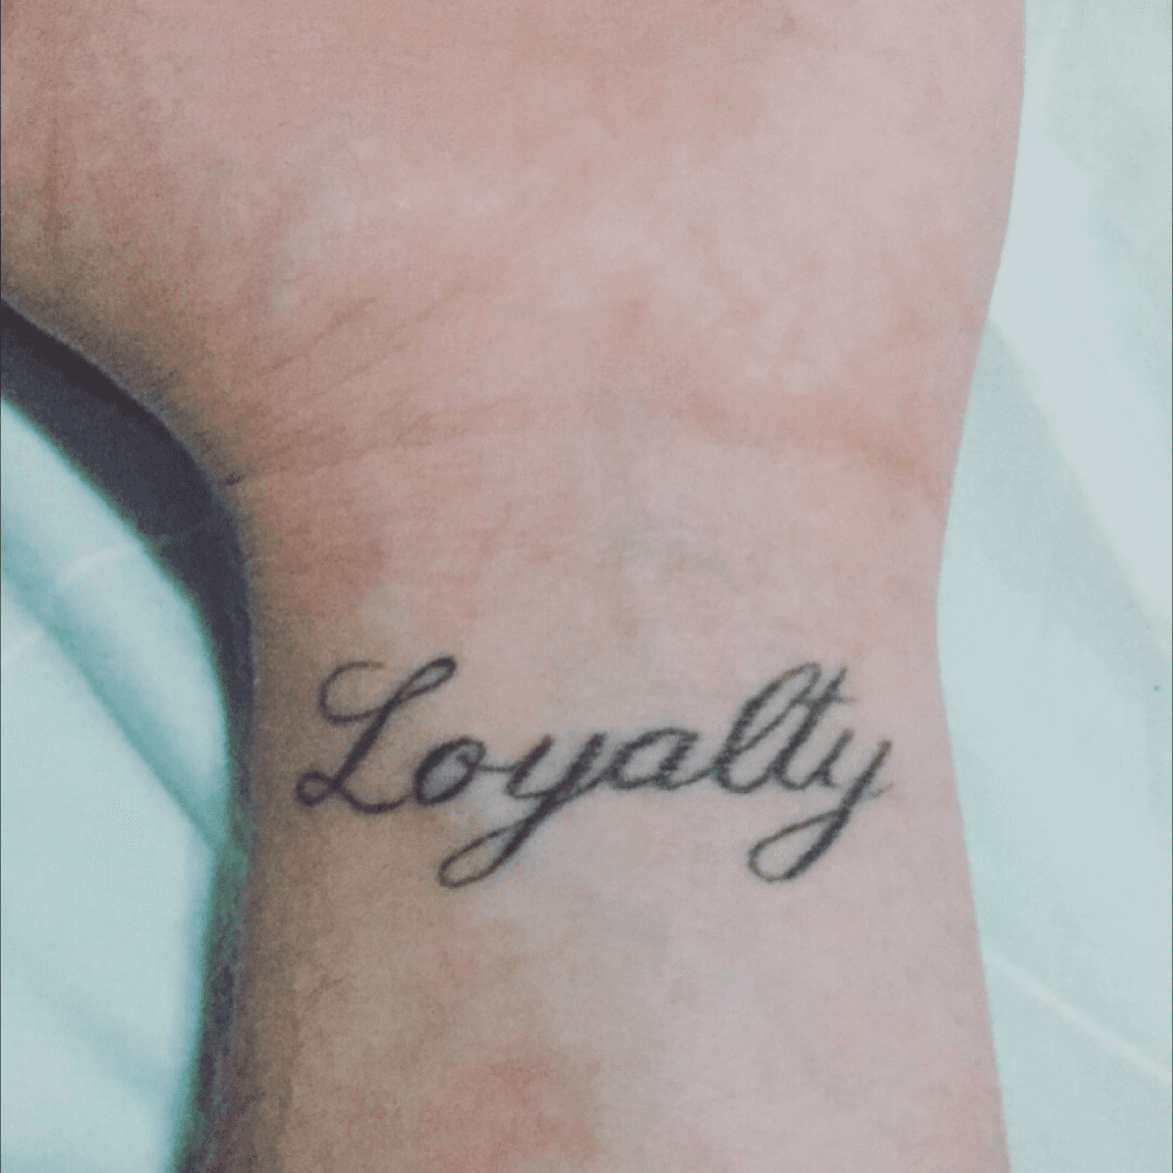 Tattoo uploaded by Travis  Loyalty and respect words to live by Respect  loyalty wristtattoo  Tattoodo